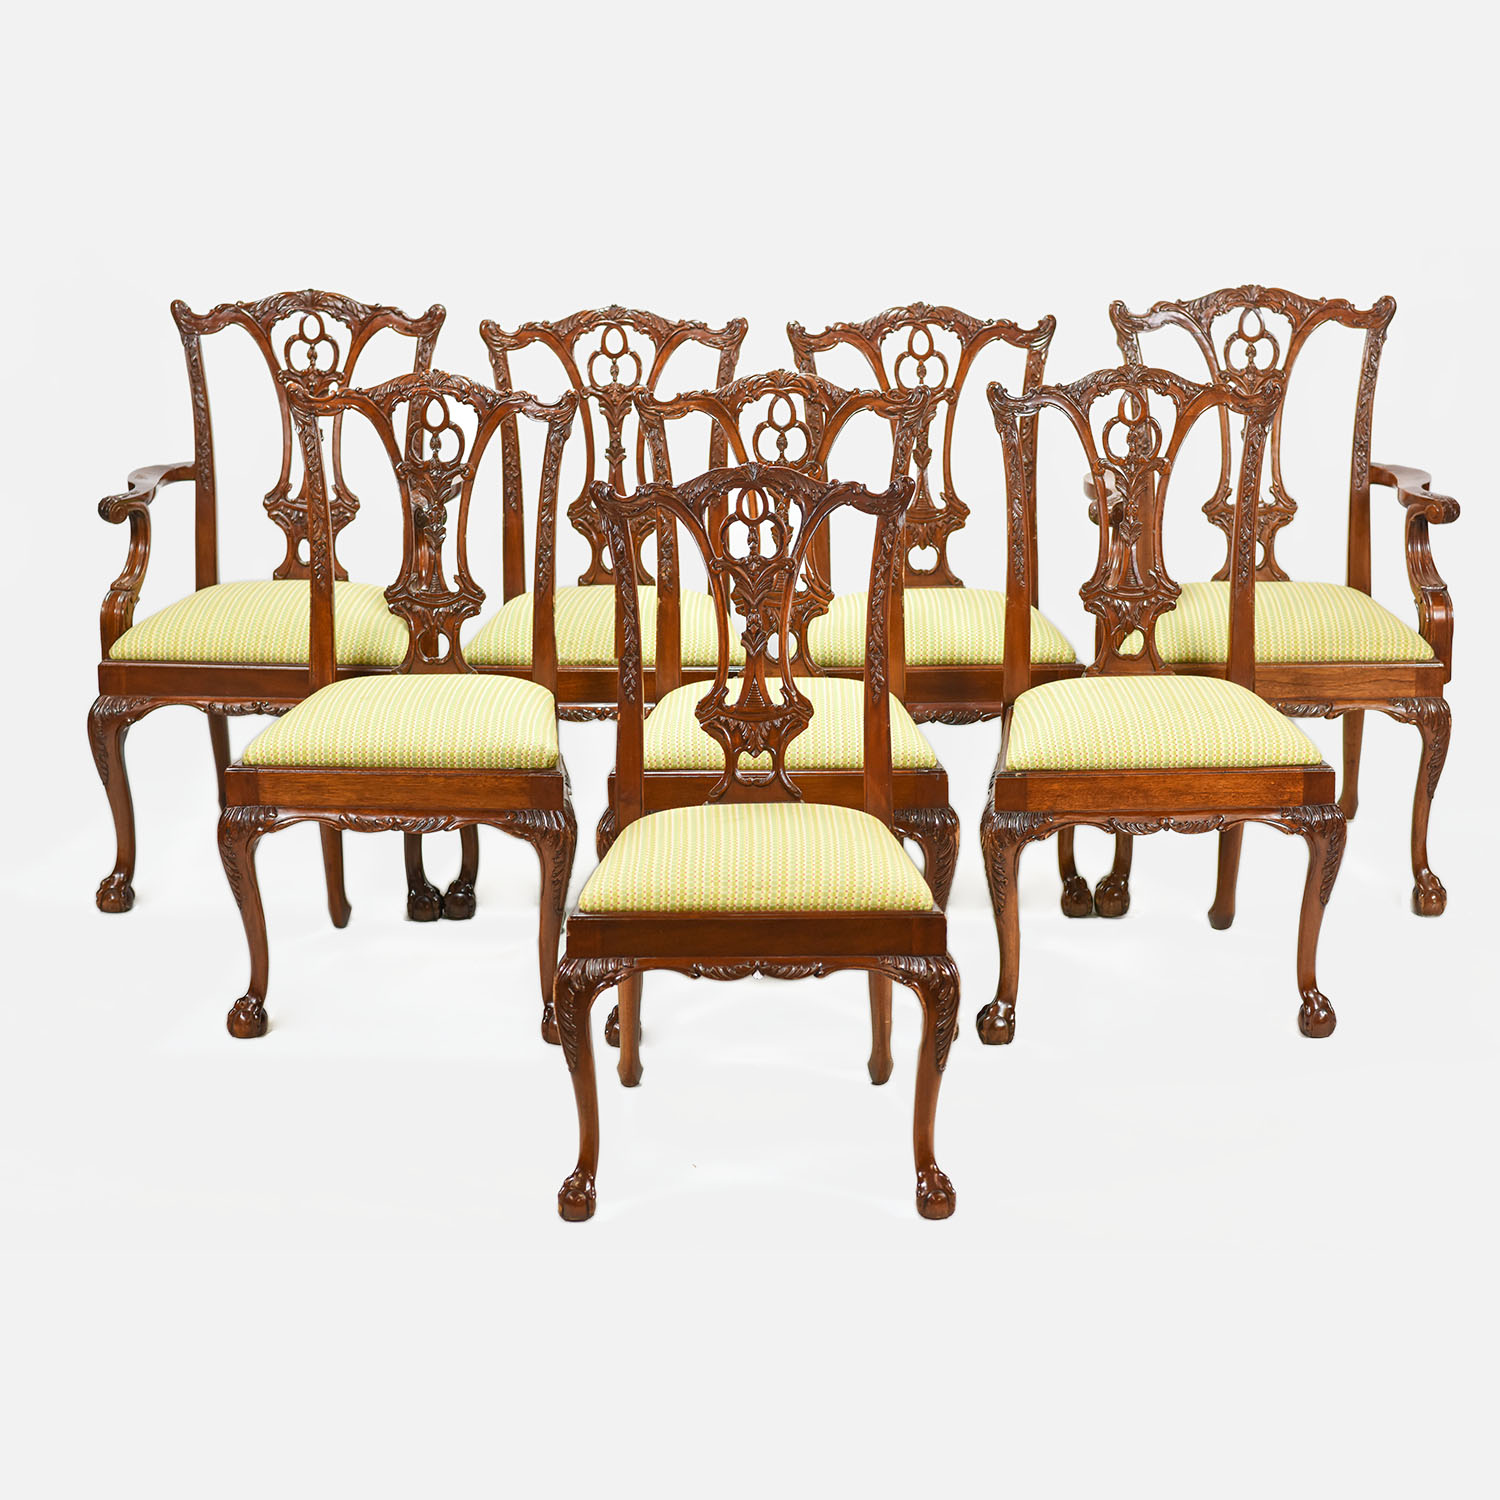 8 Carved Solid Mahogany Chippendale Dining Chairs